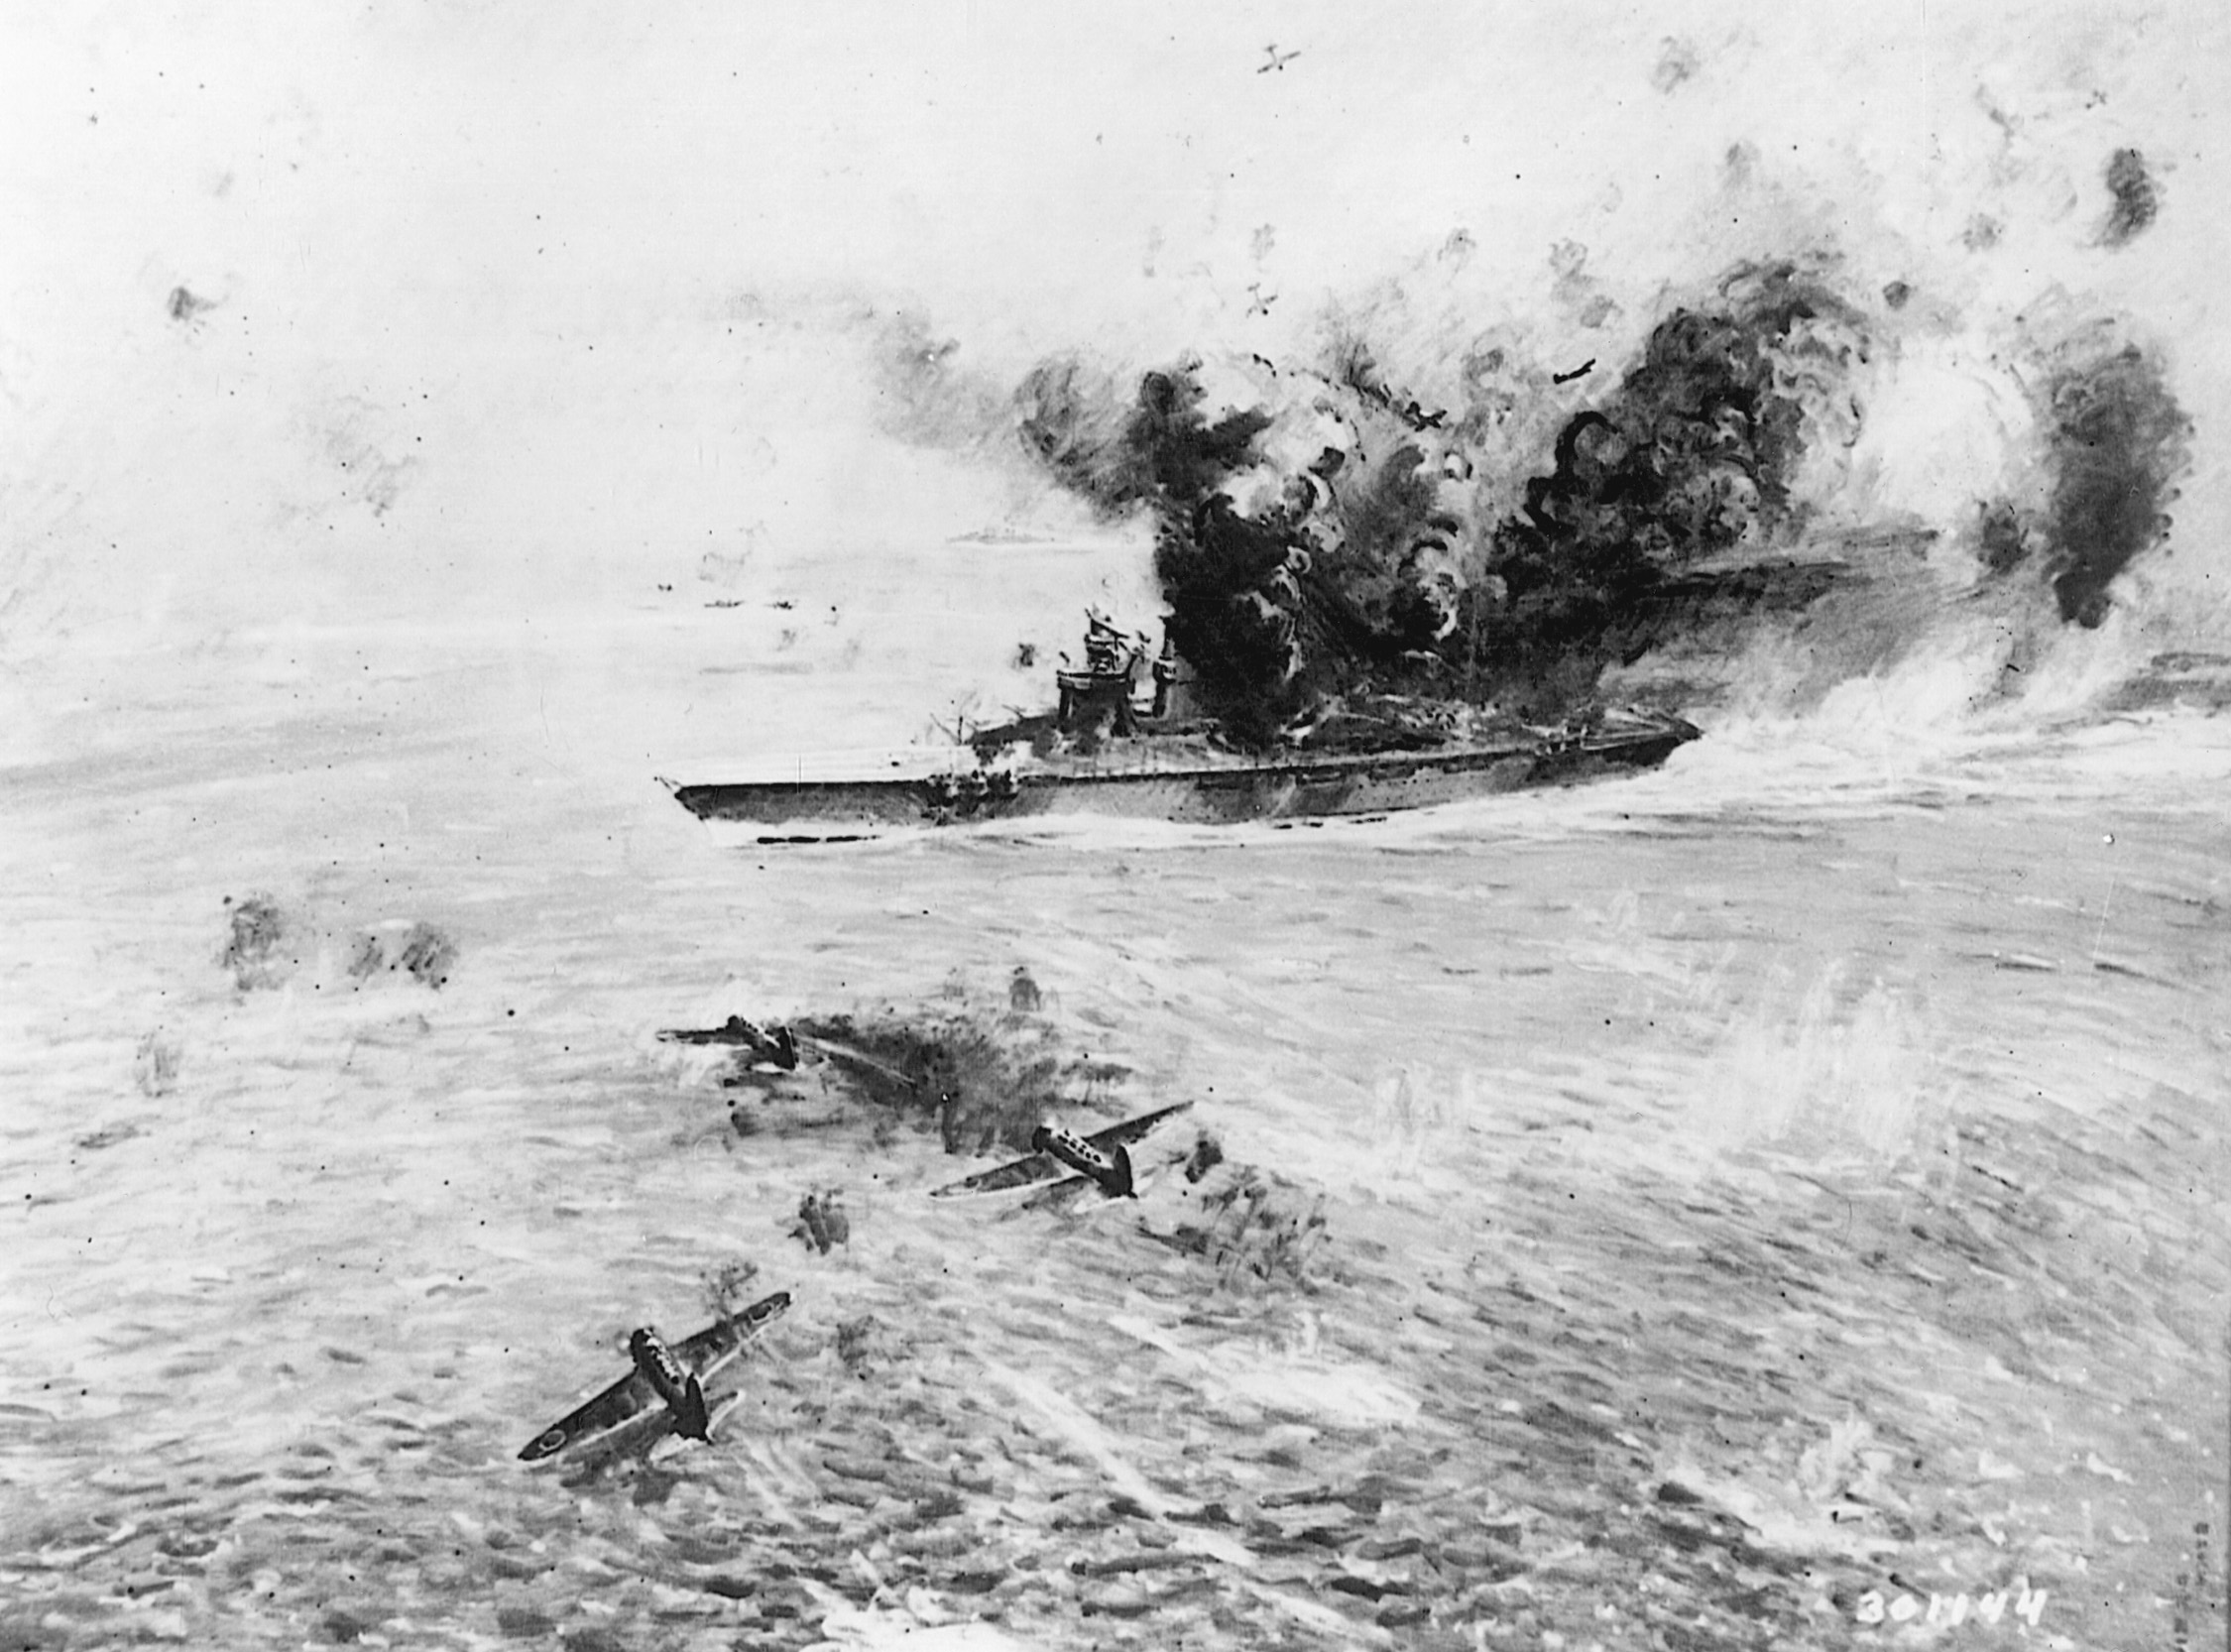 In this depiction of action in the Coral Sea, Japanese aircraft press home attacks against the carrier USS Lexington.